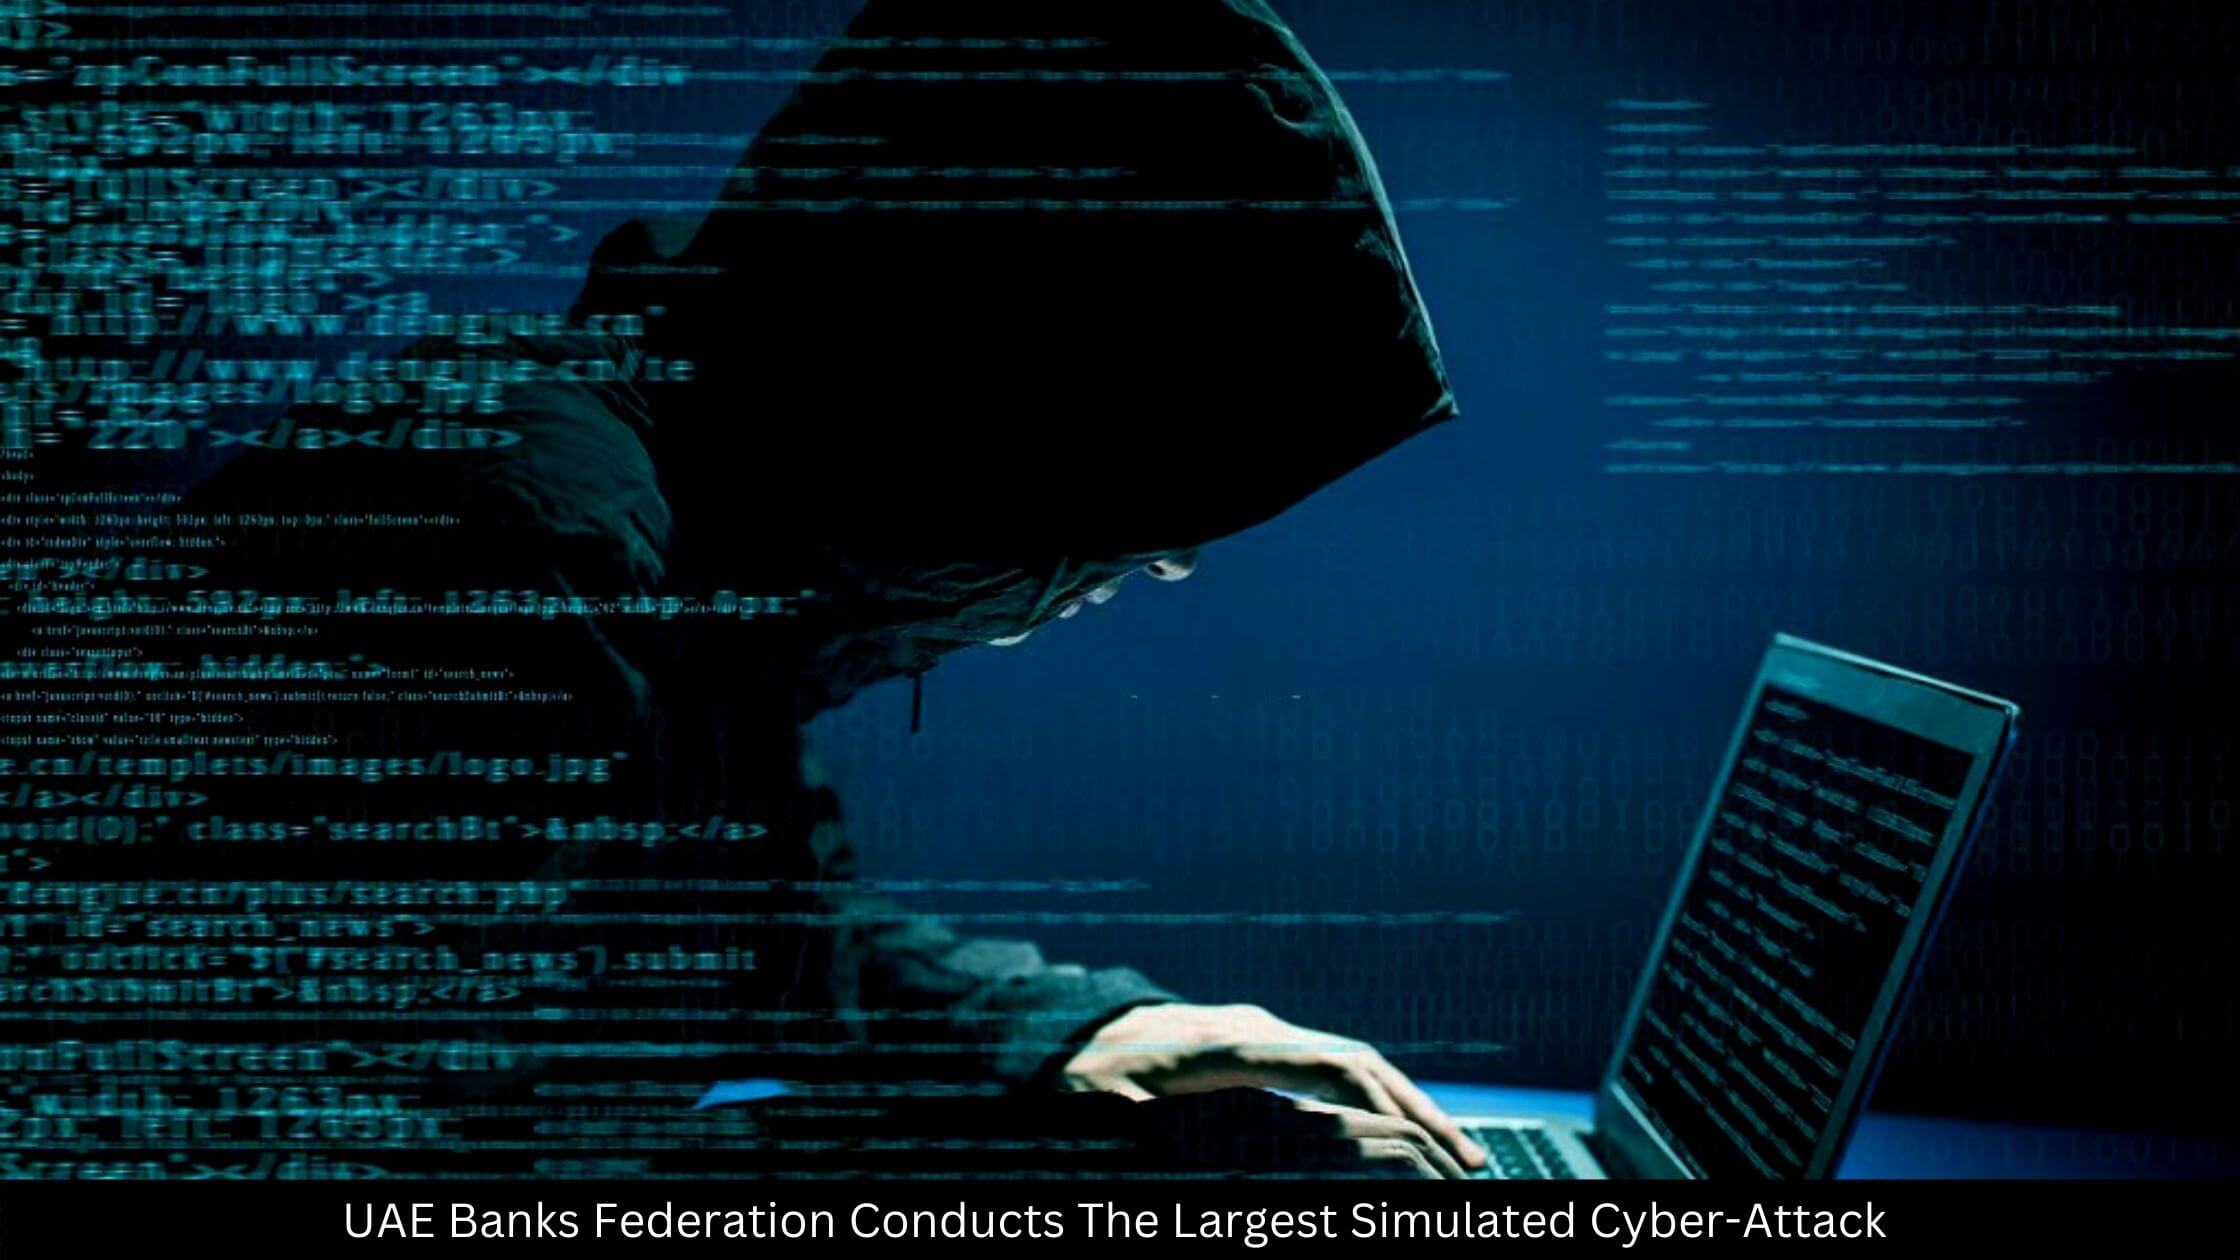 UAE Banks Federation Conducts The Largest Simulated Cyber-Attack